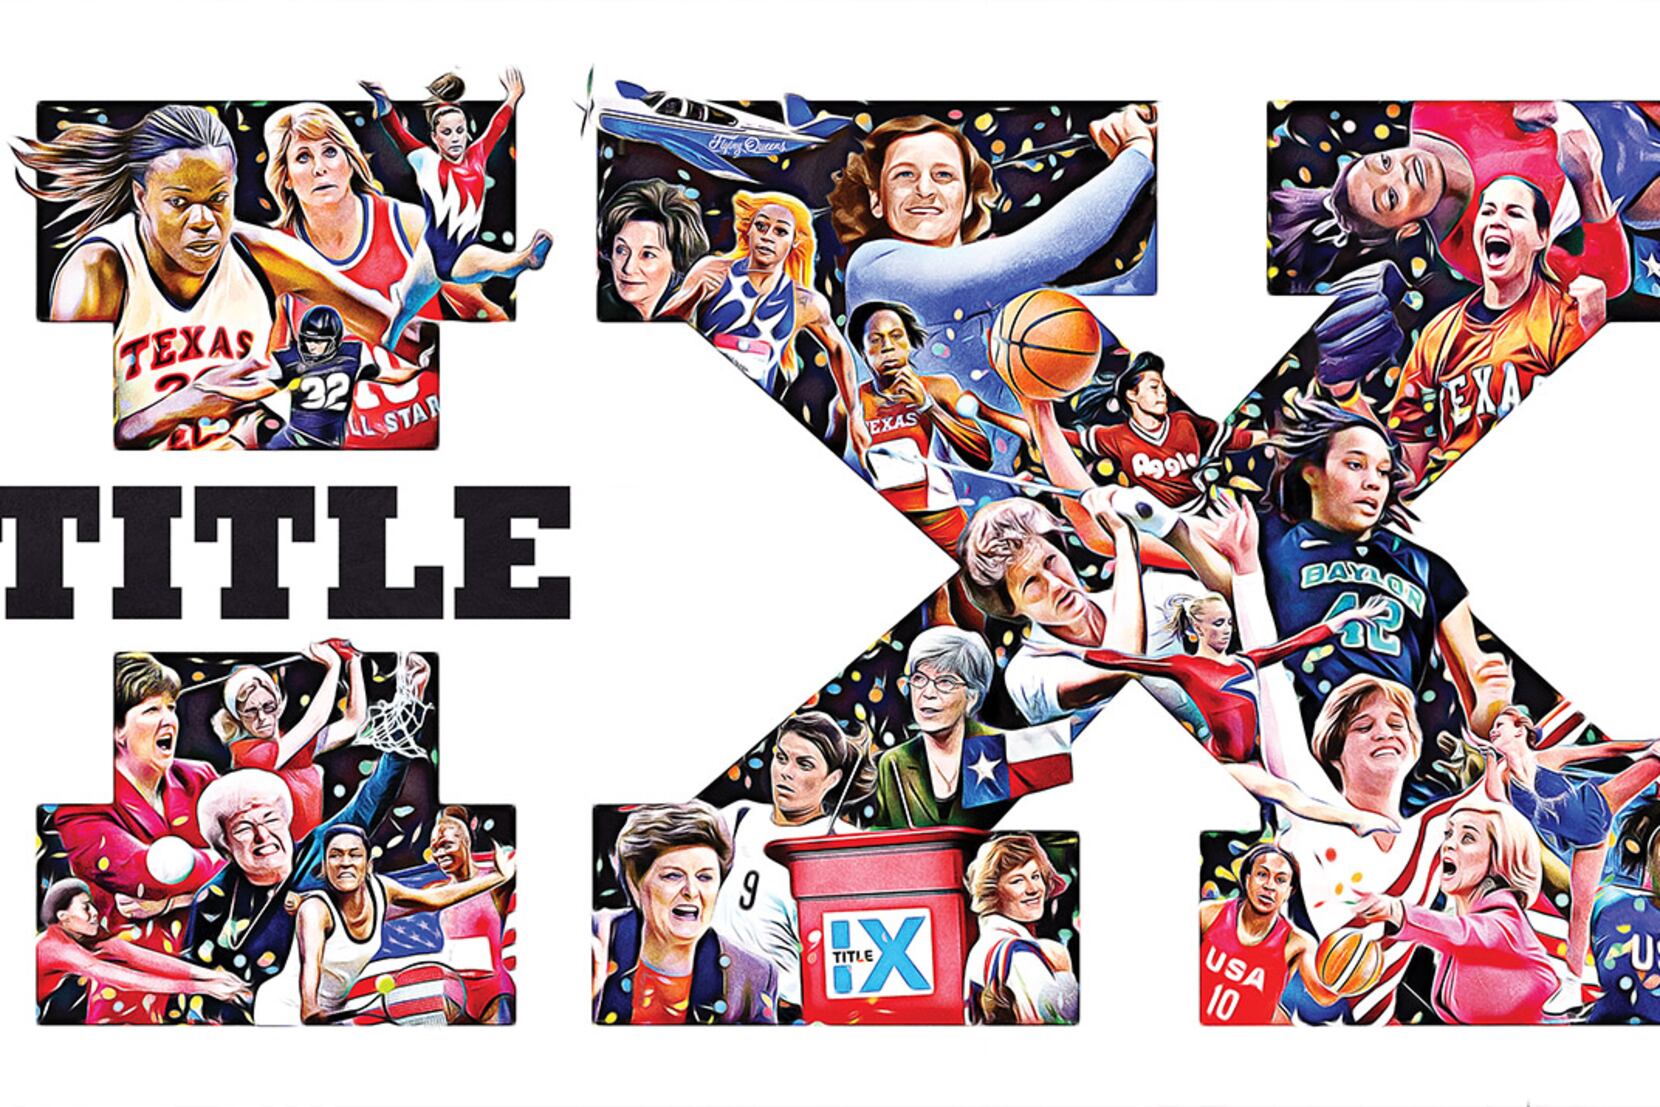 WNBA 25th anniversary: 25 greatest moments in history - Sports Illustrated